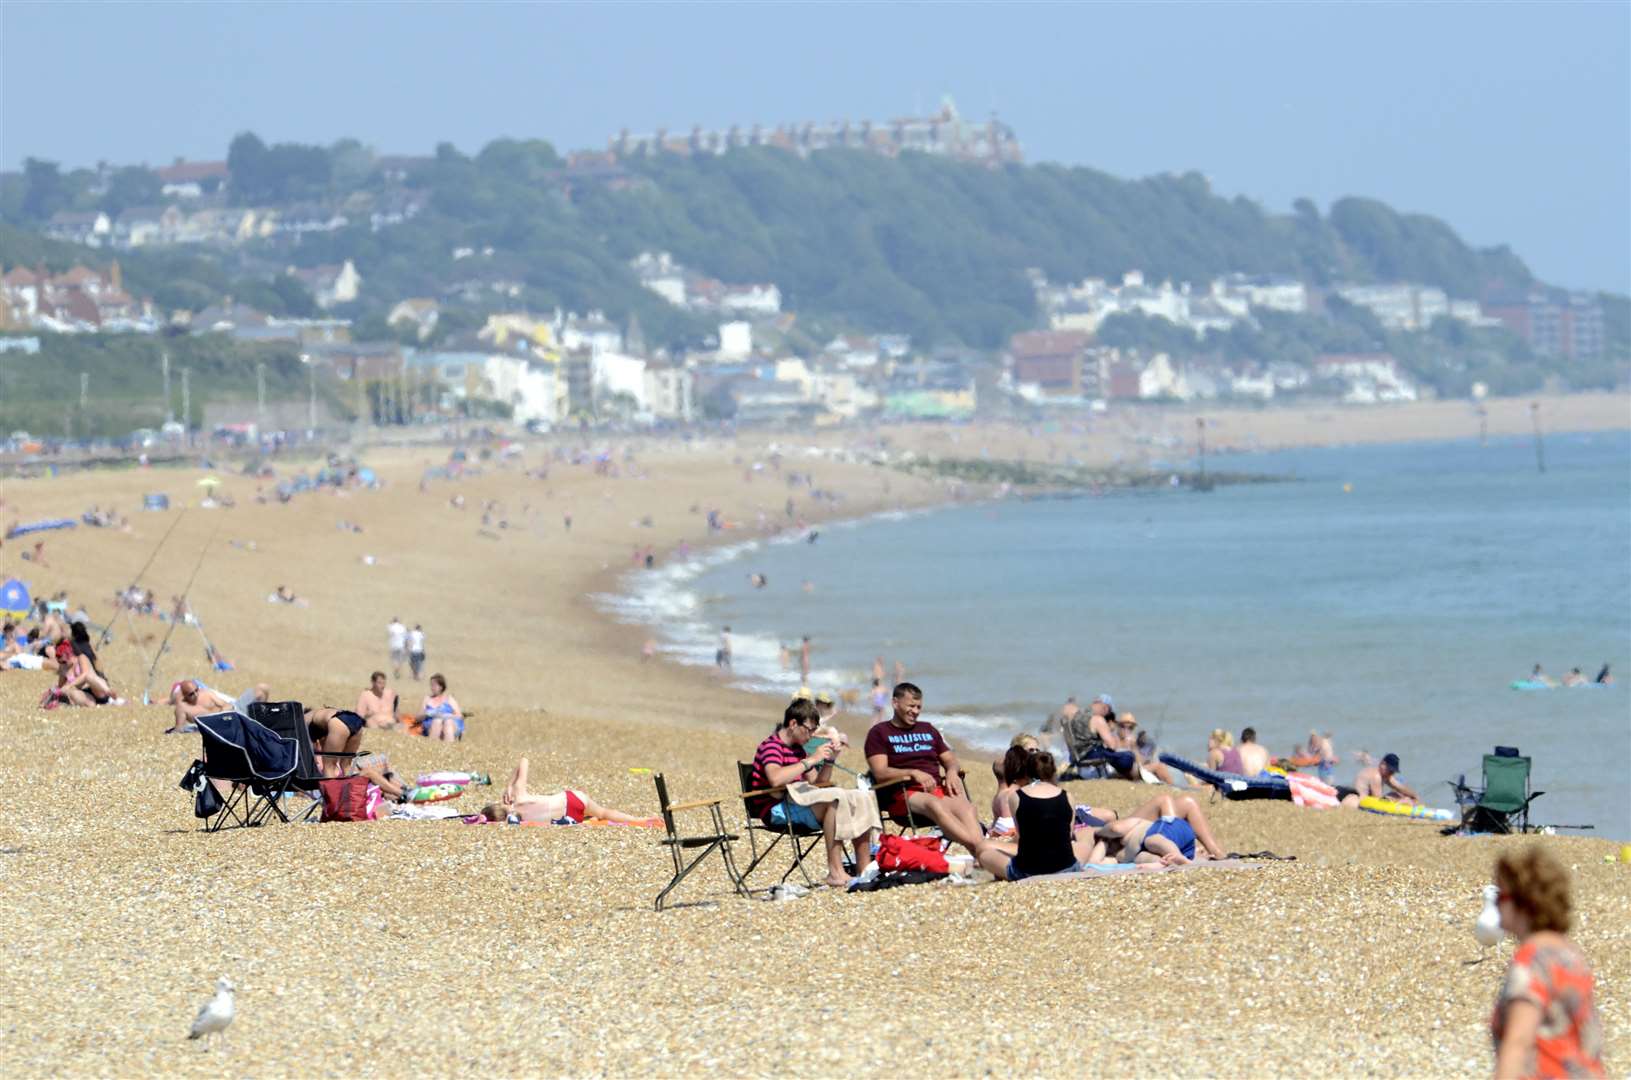 Beach-goers will be able to soak up the sun